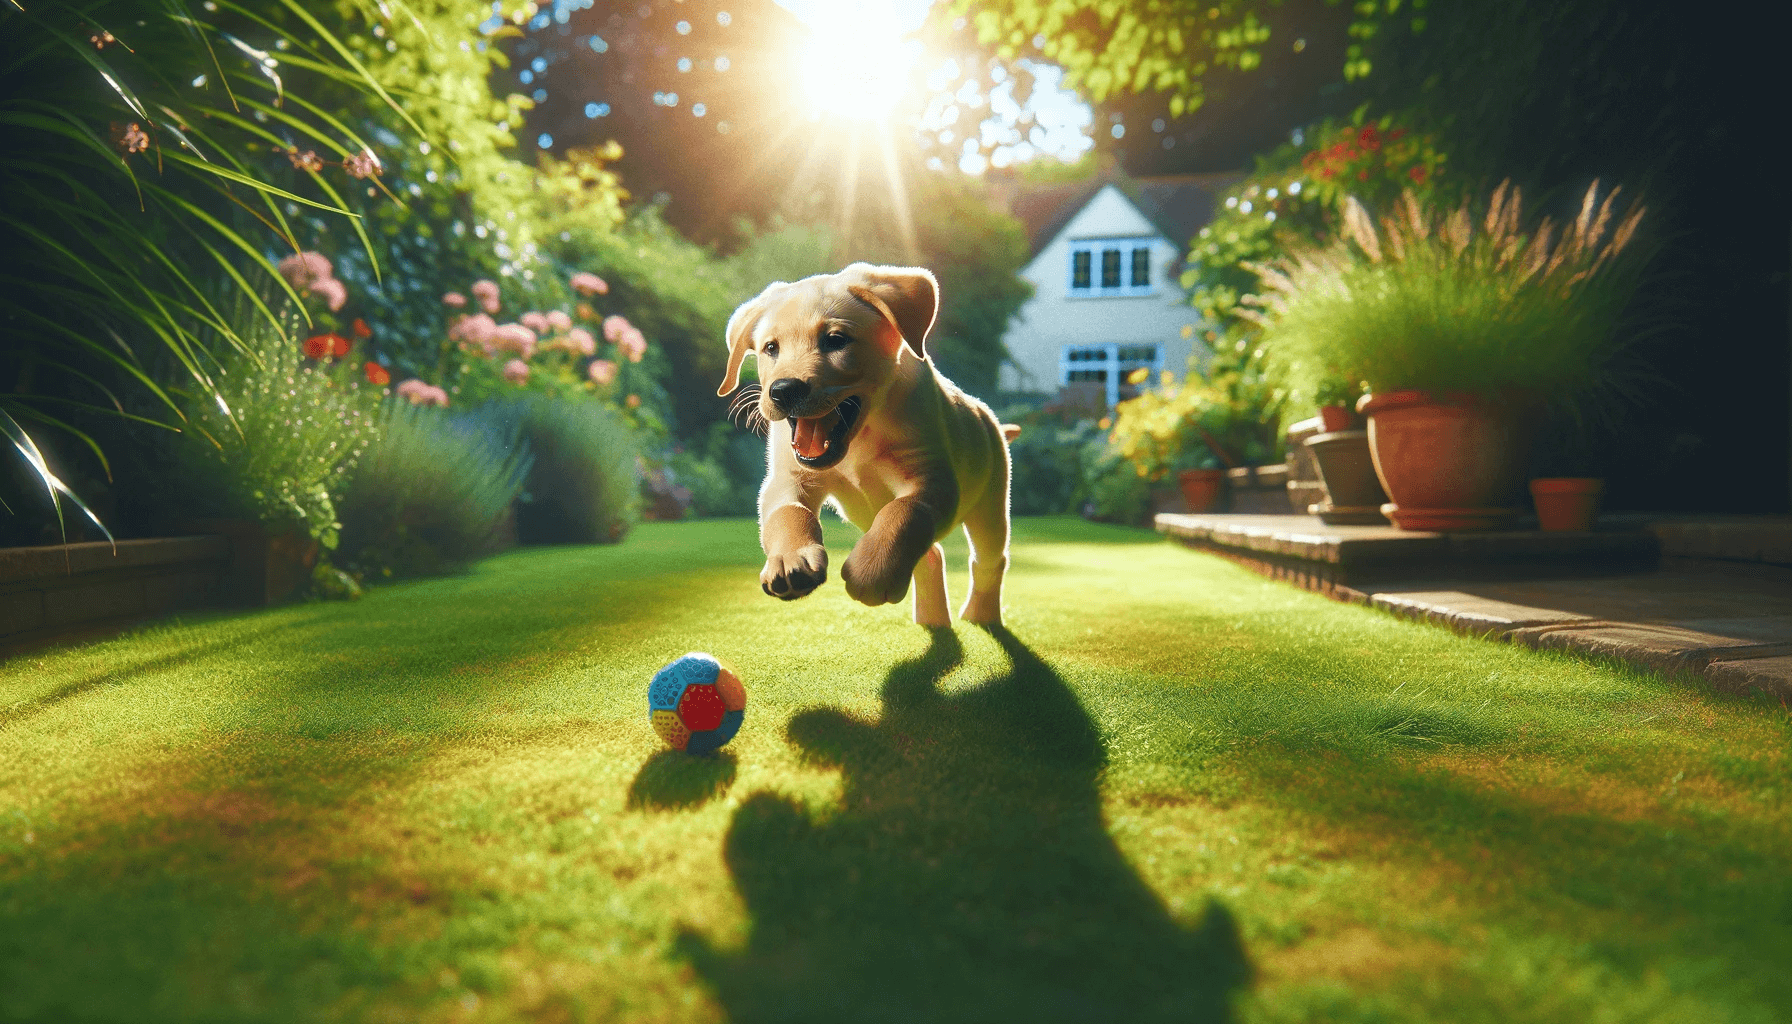 Energetic Labrador Retriever (Labradorii) puppy gleefully playing fetch in a sunlit backyard. The scene captures the puppy in mid-leap, eagerly chasing after a brightly colored ball.